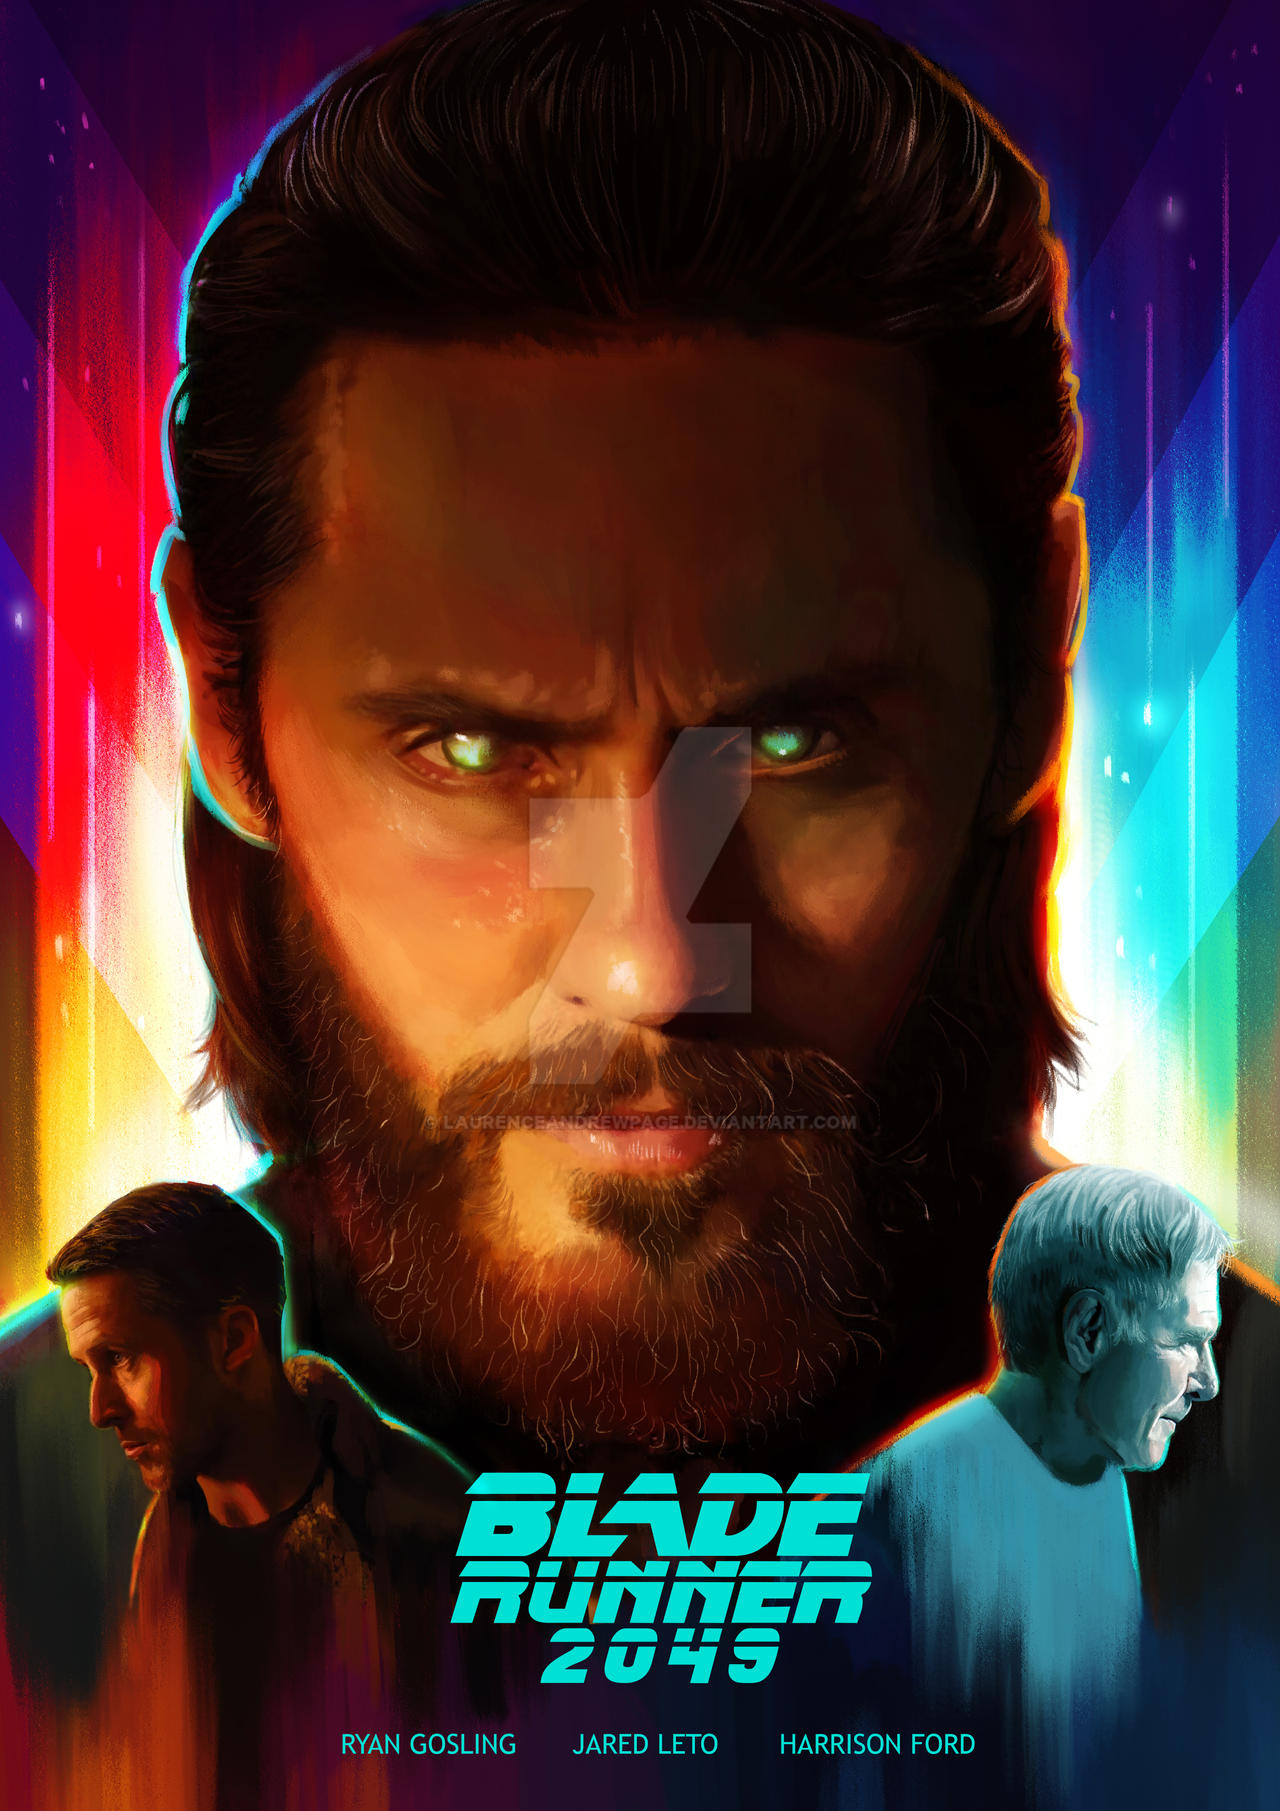 Blade Runner 2049 Poster Painting By Laurenceandrewpage On Deviantart